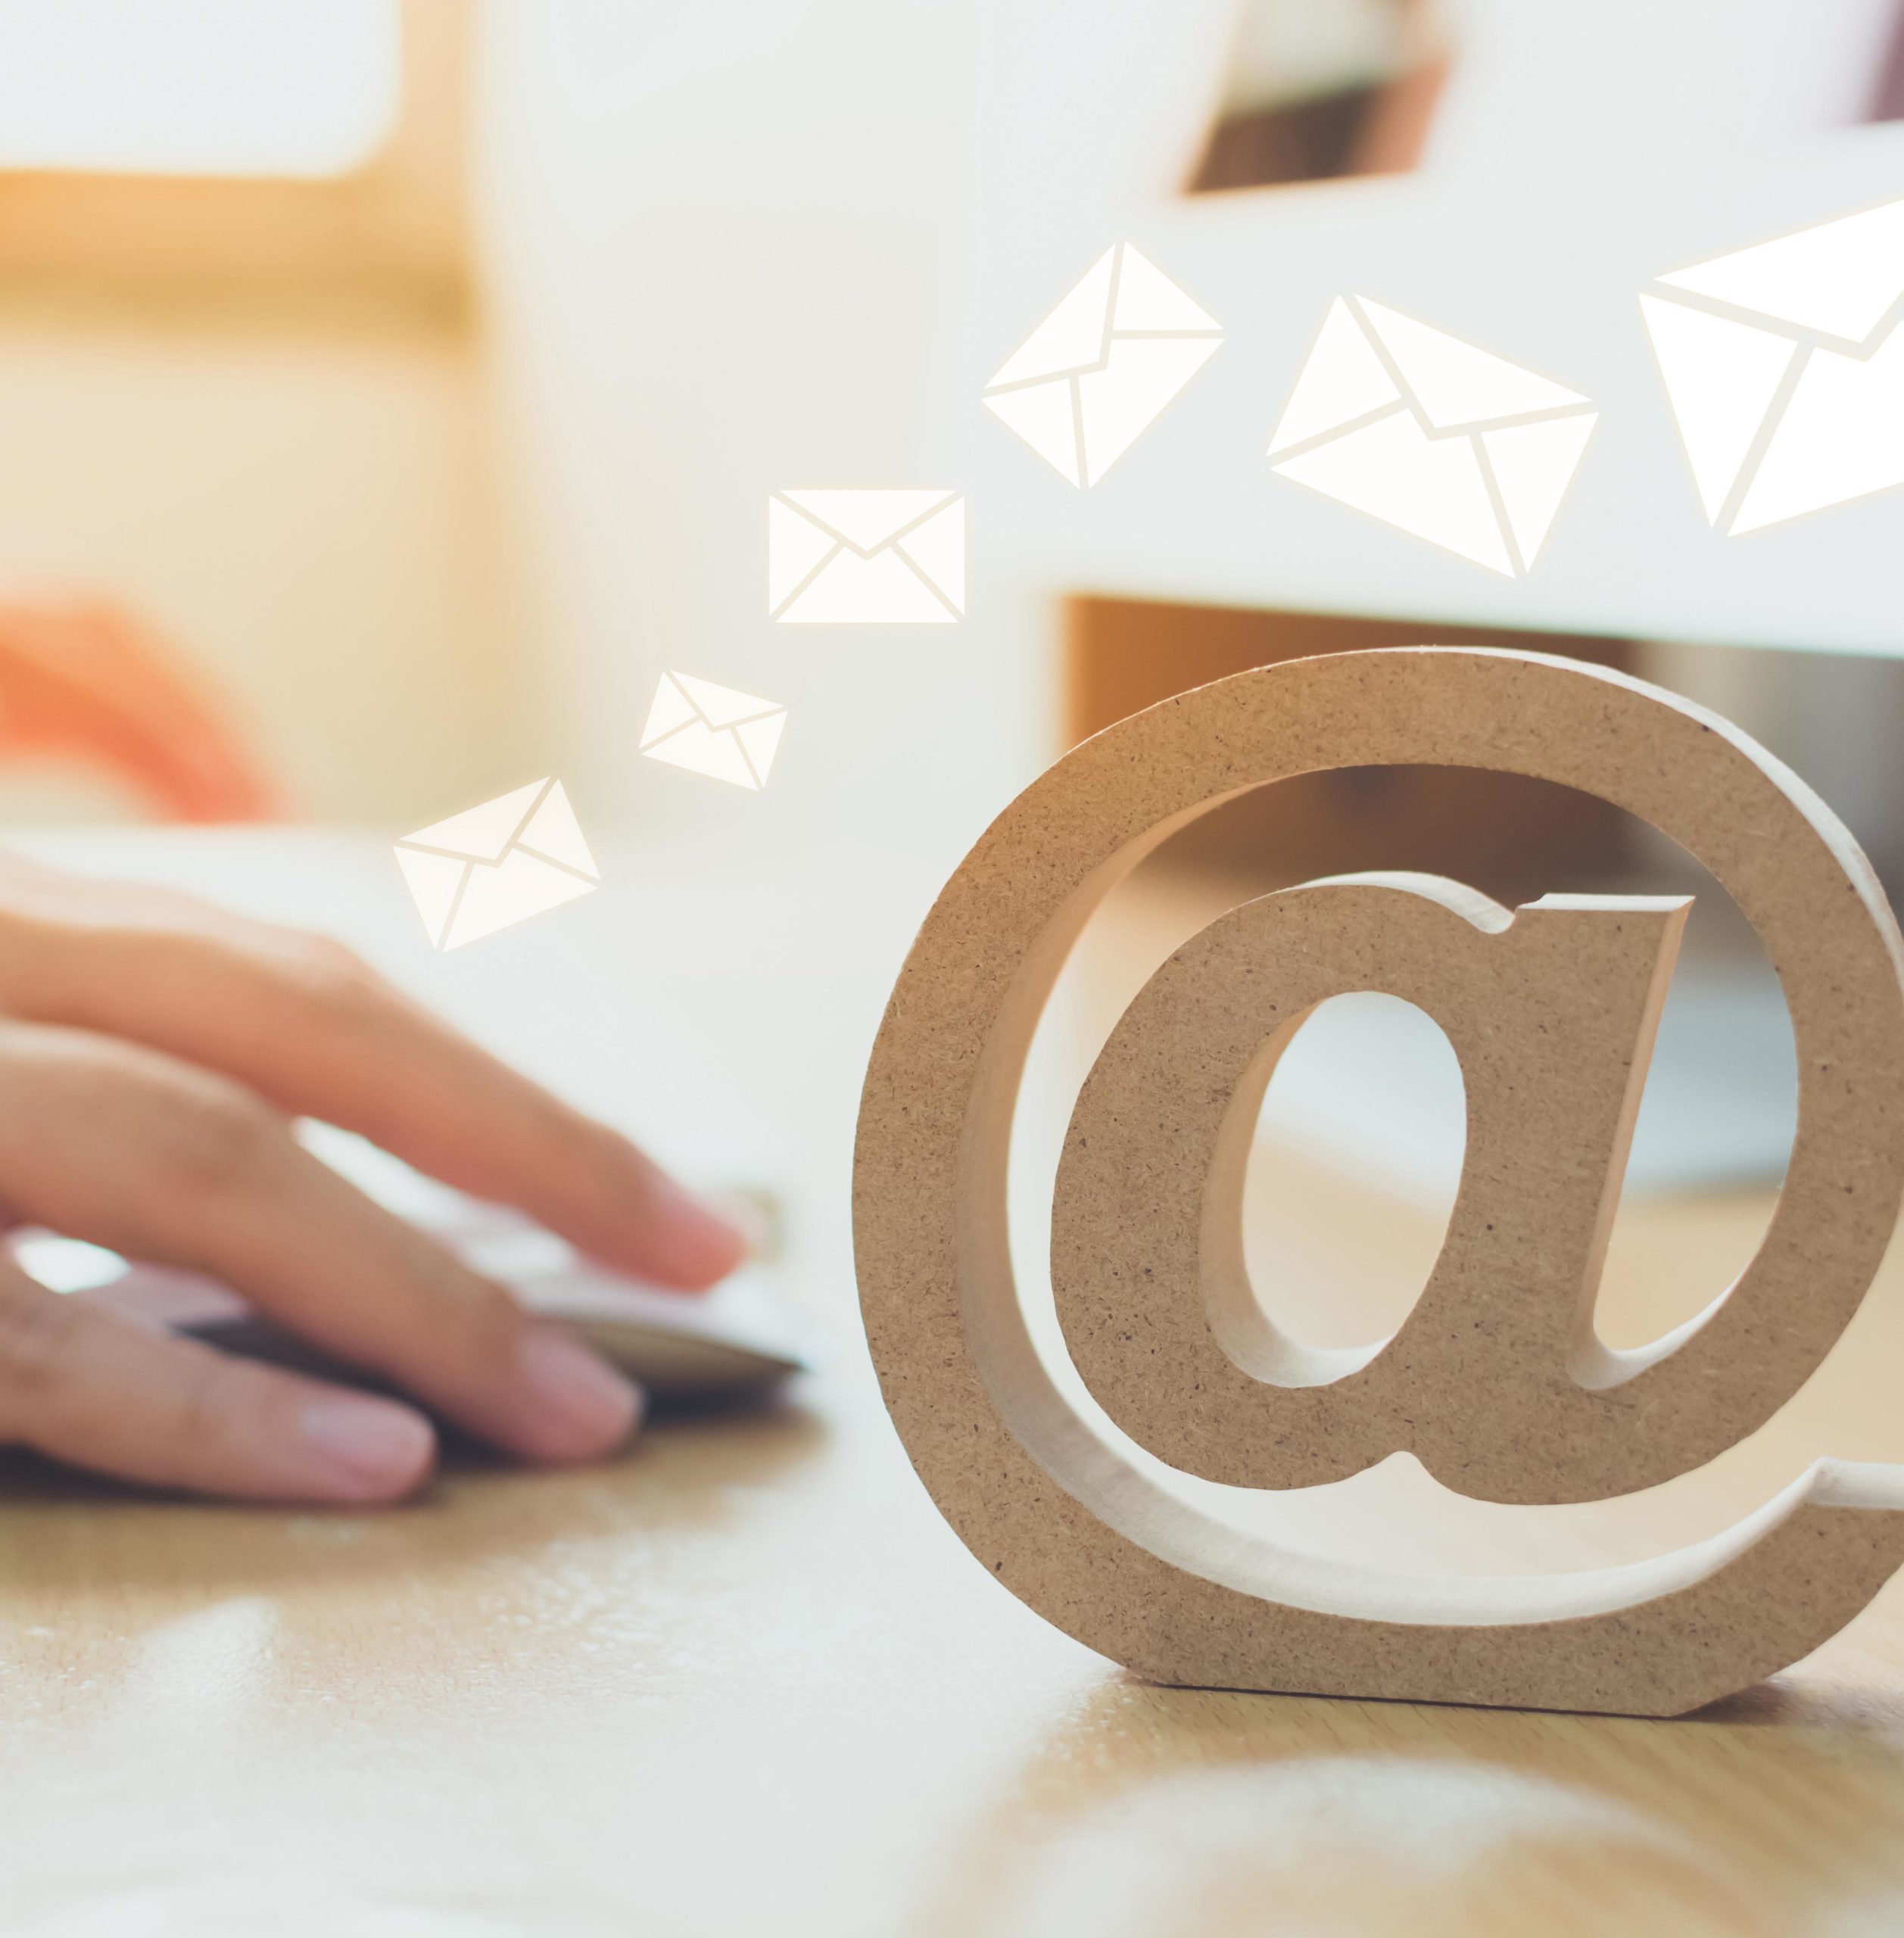 Email marketing concept, Hand using computer sending message with wooden email address symbol and envelope icon